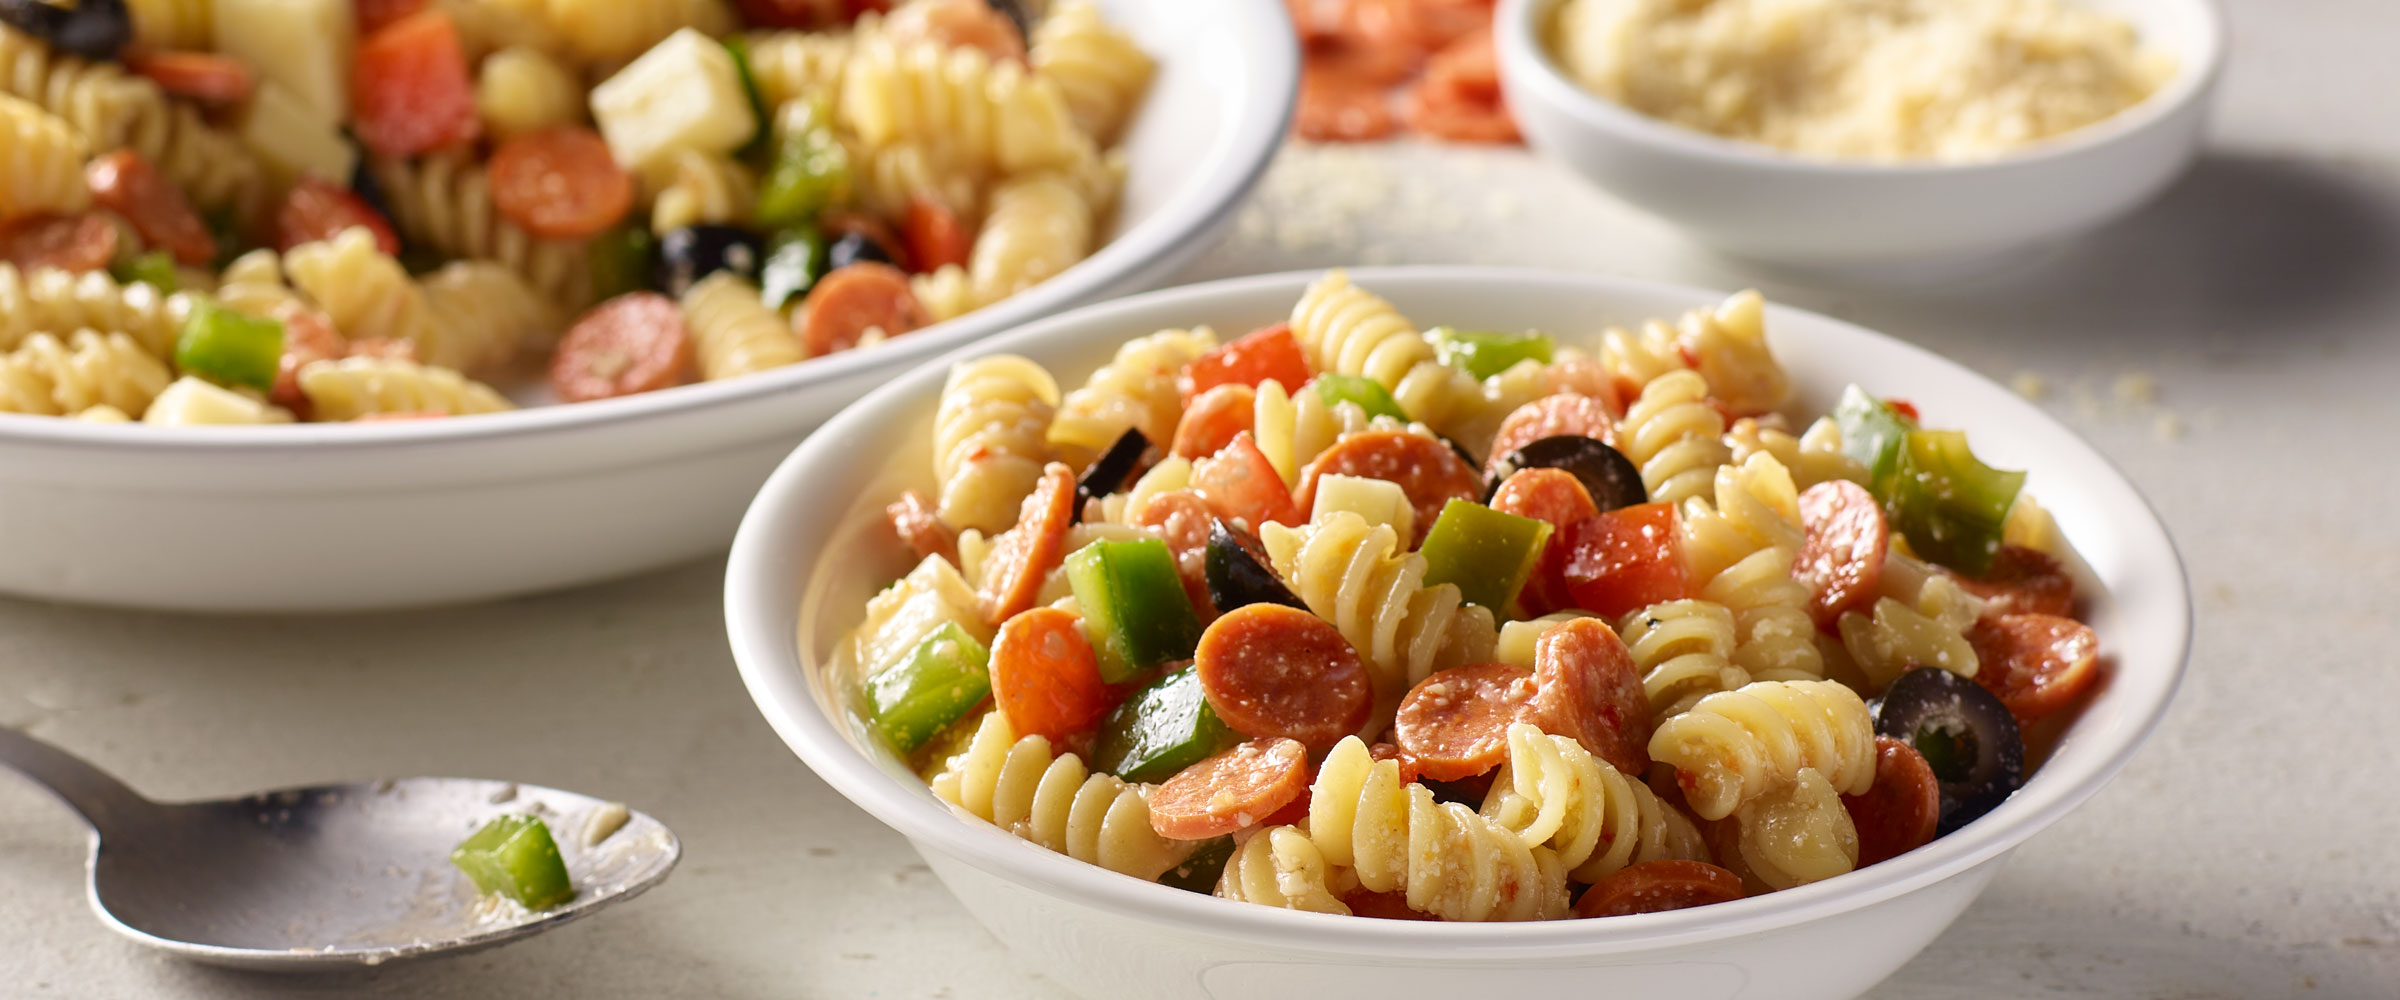 Pepperoni Minis Pasta Salad in white bowl with serving spoon